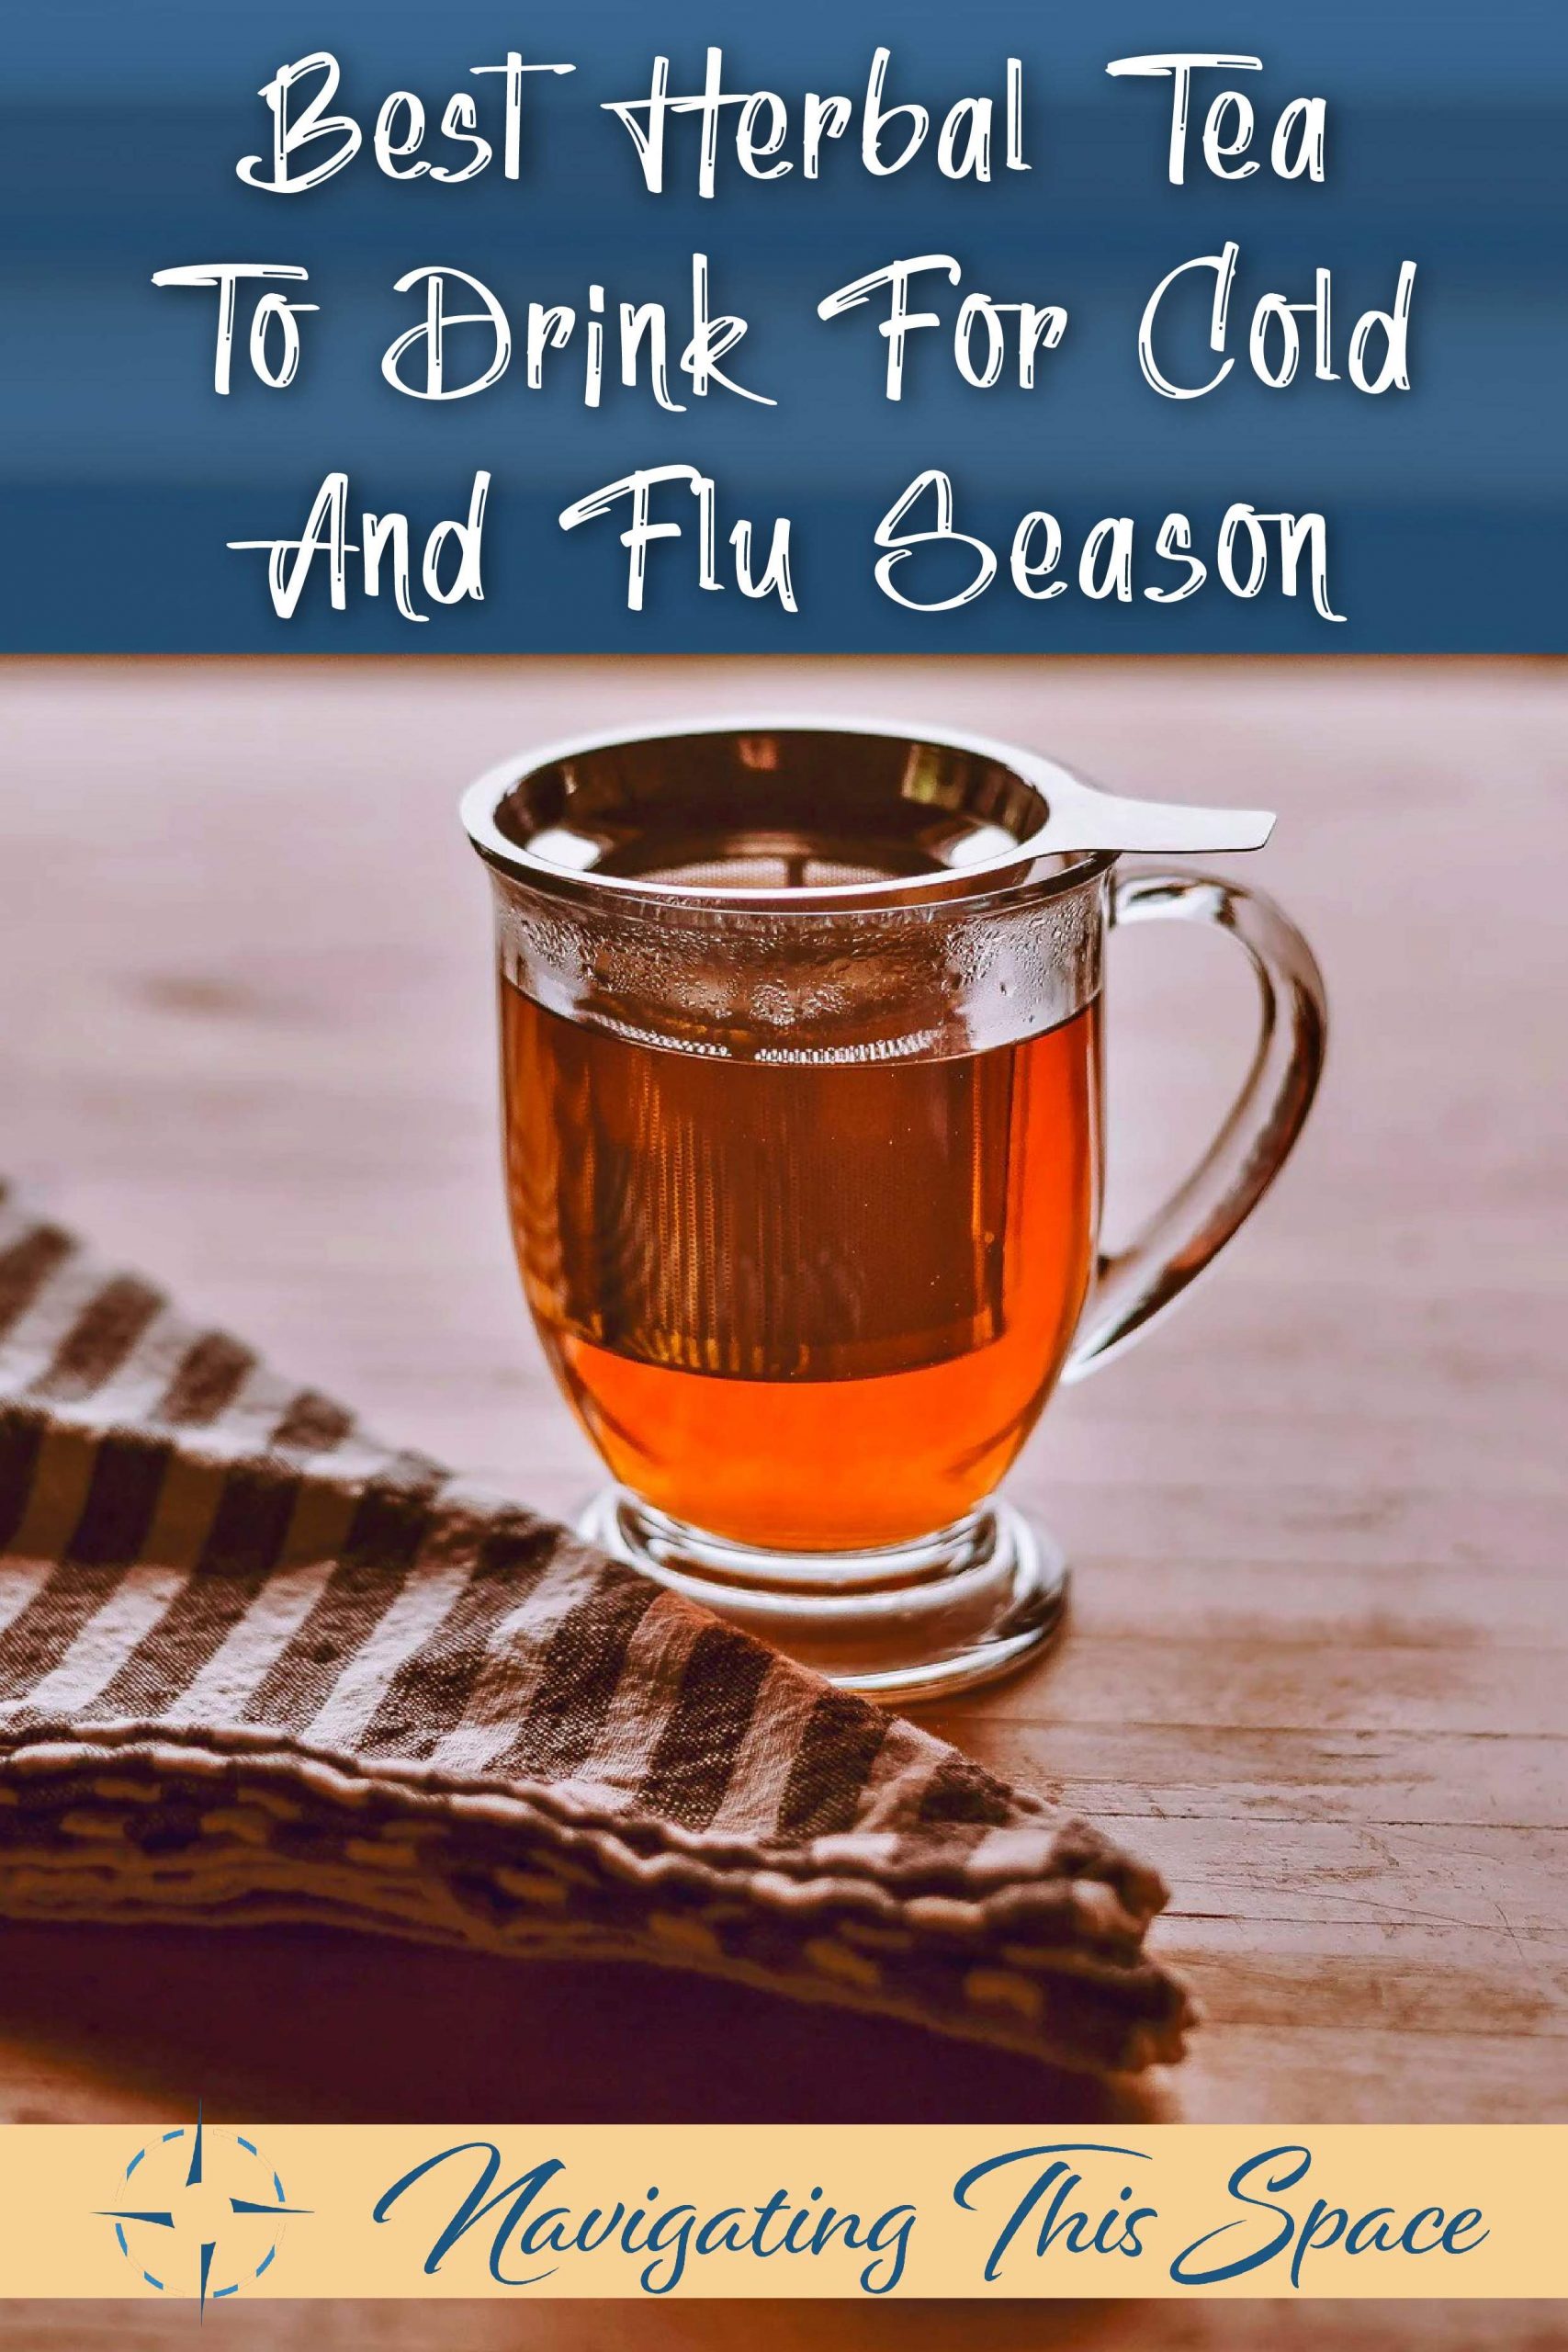 Best herbal tea to drink for cold and flu season